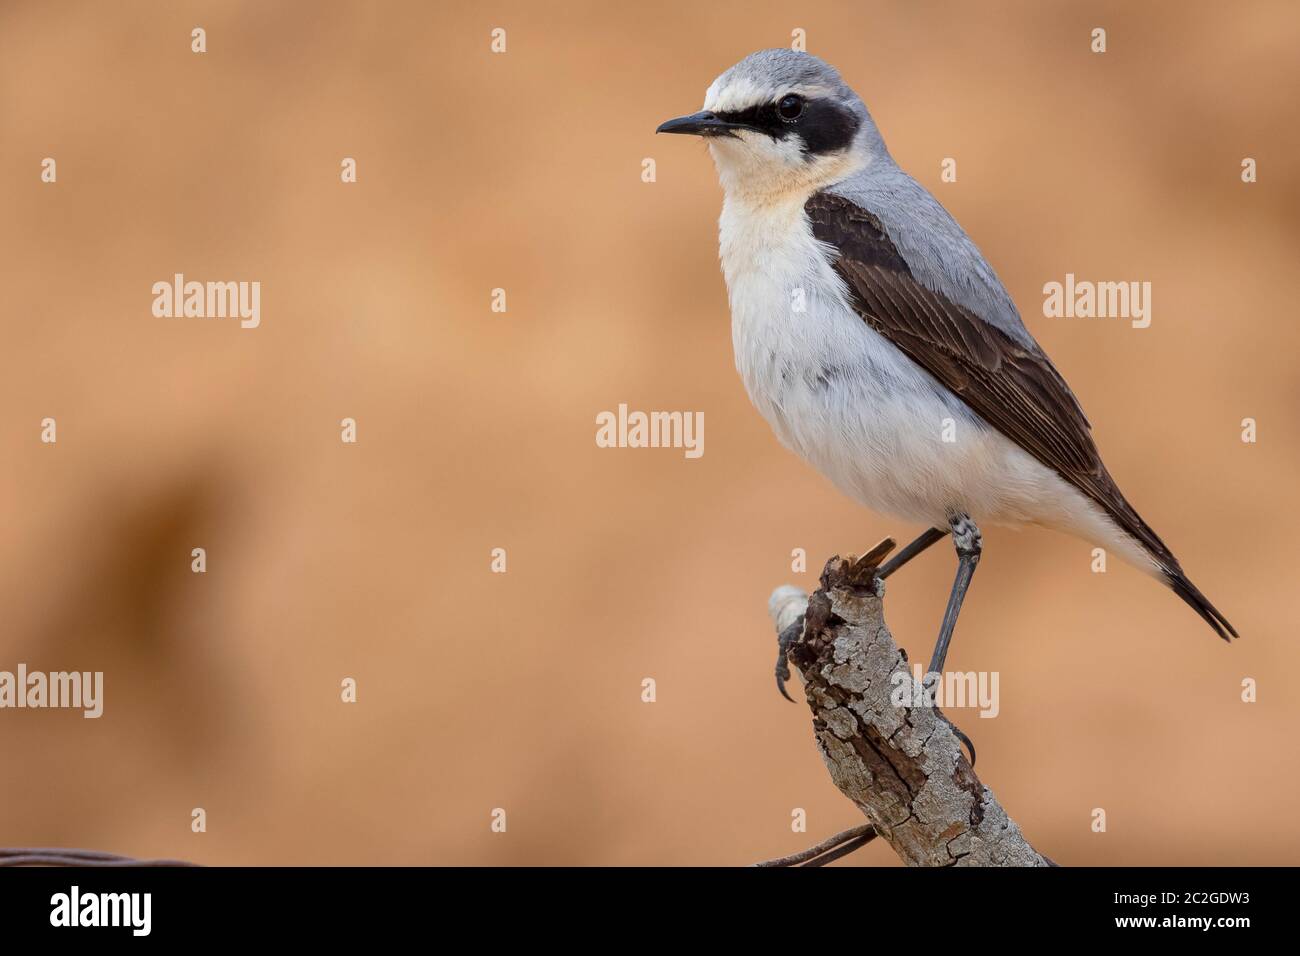 Male of Northern wheatear, Oenanthe oenanthe, perched on a branch on a single ocher background. Horizontal format with space for text. Spain Stock Photo